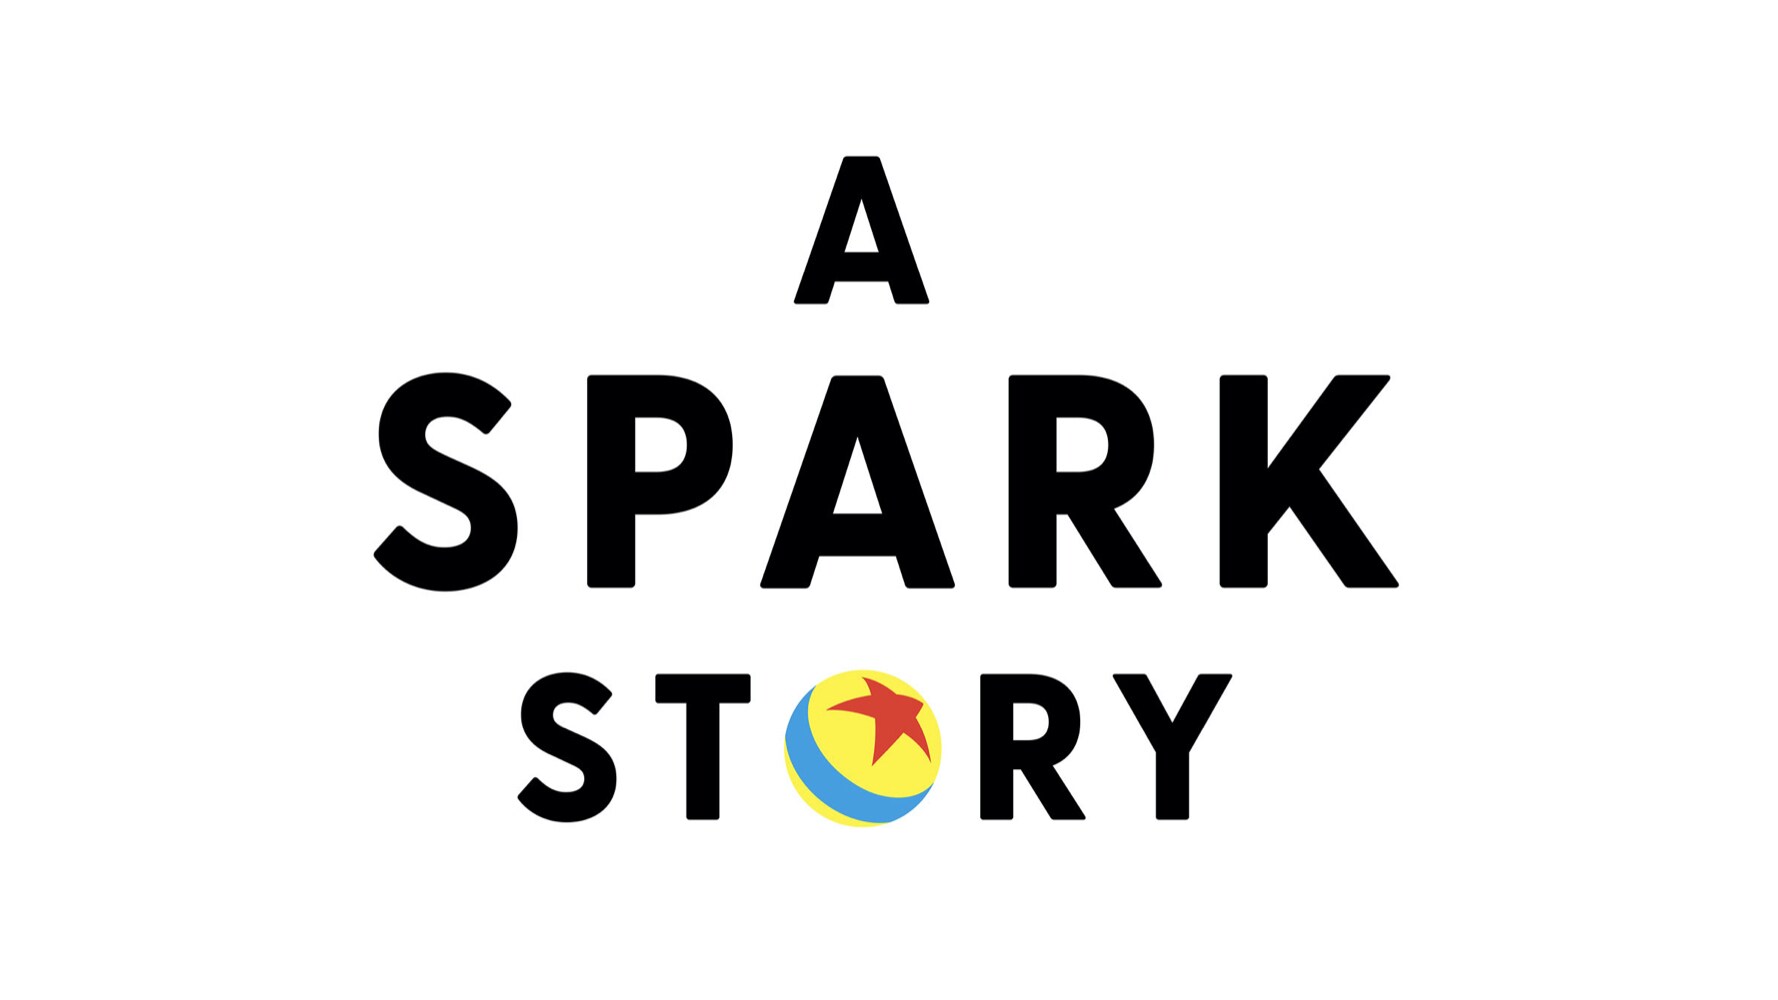 Disney+ And Pixar Animation Studios Release New Trailer For “A Spark Story”